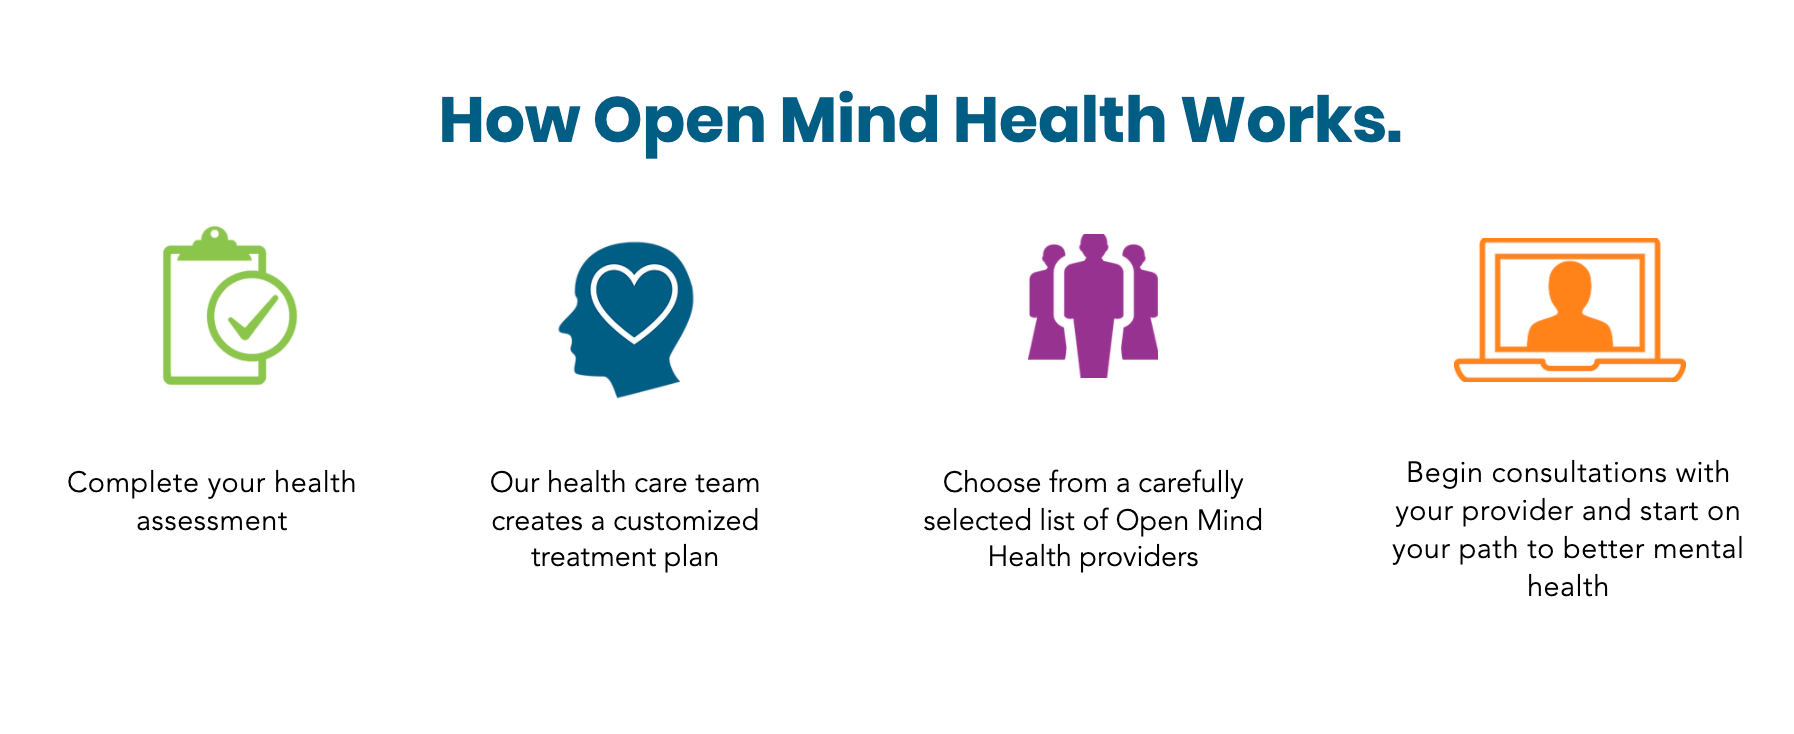 Open Mind Health, Monday, December 13, 2021, Press release picture